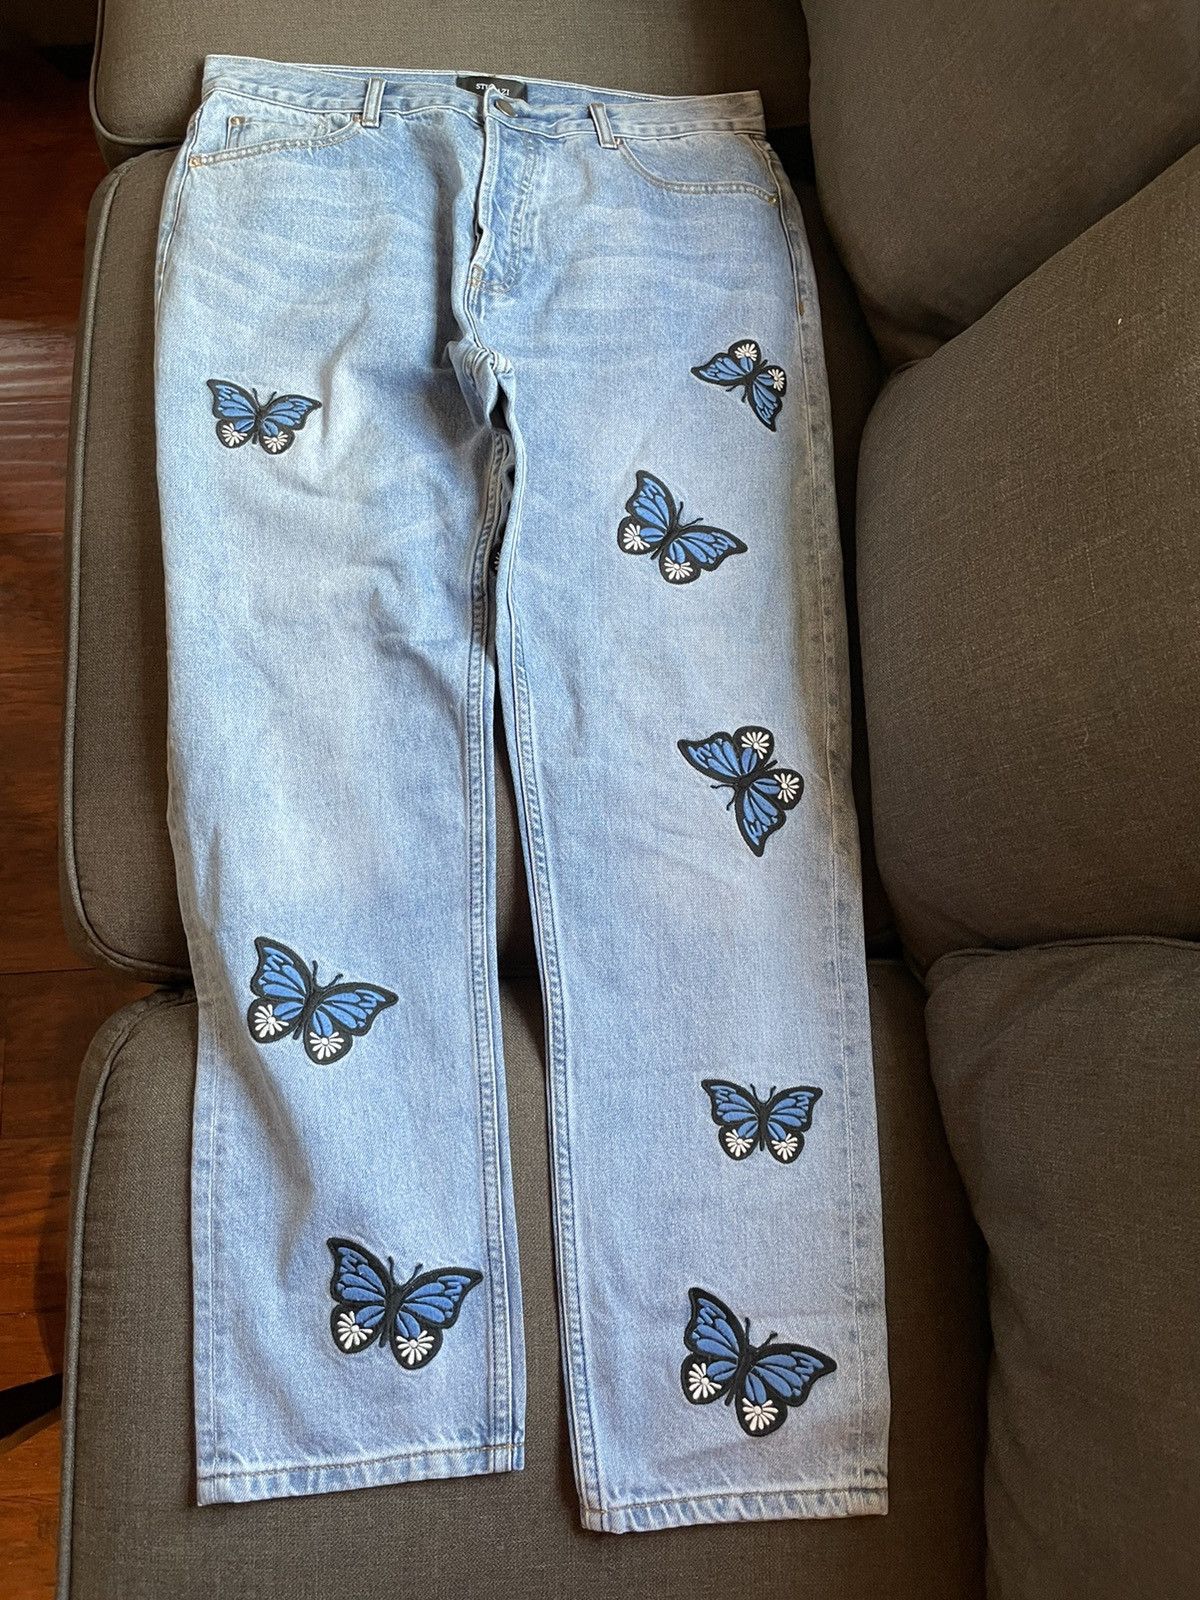 Japanese Brand STUGAZI BUTTERFLY EMBROIDERED JEANS | Grailed